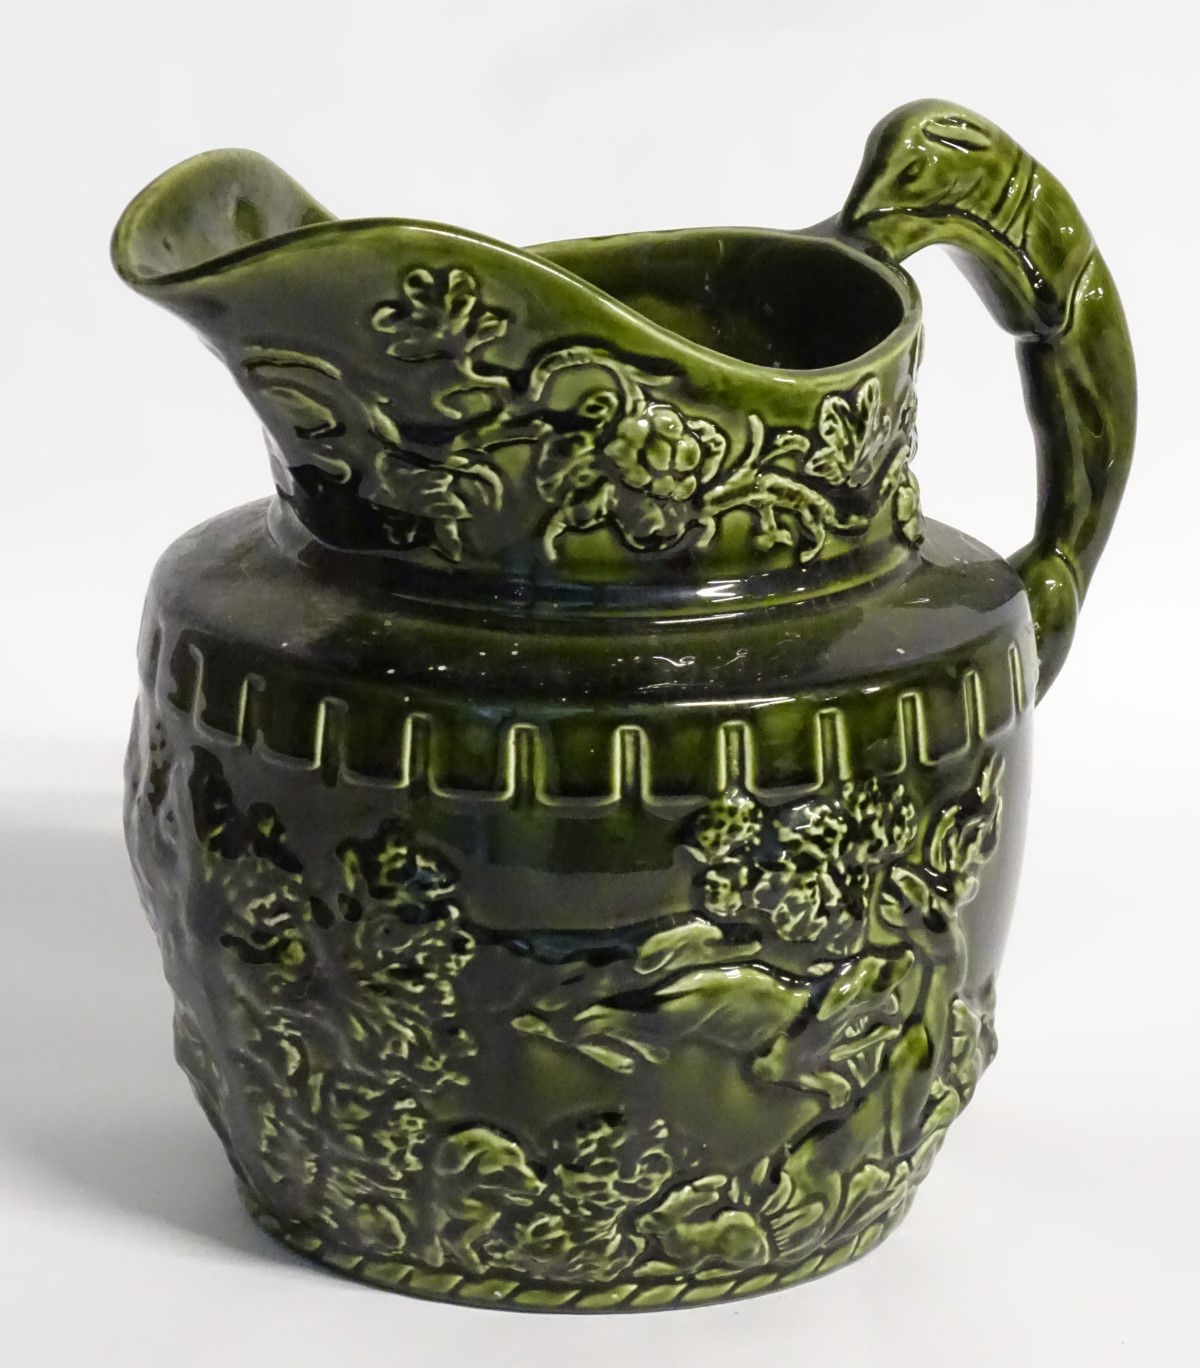 A 20thC Arthur Wood jug / pitcher, decorated with moulded hunting scenes and scrolling foliage, - Image 3 of 8